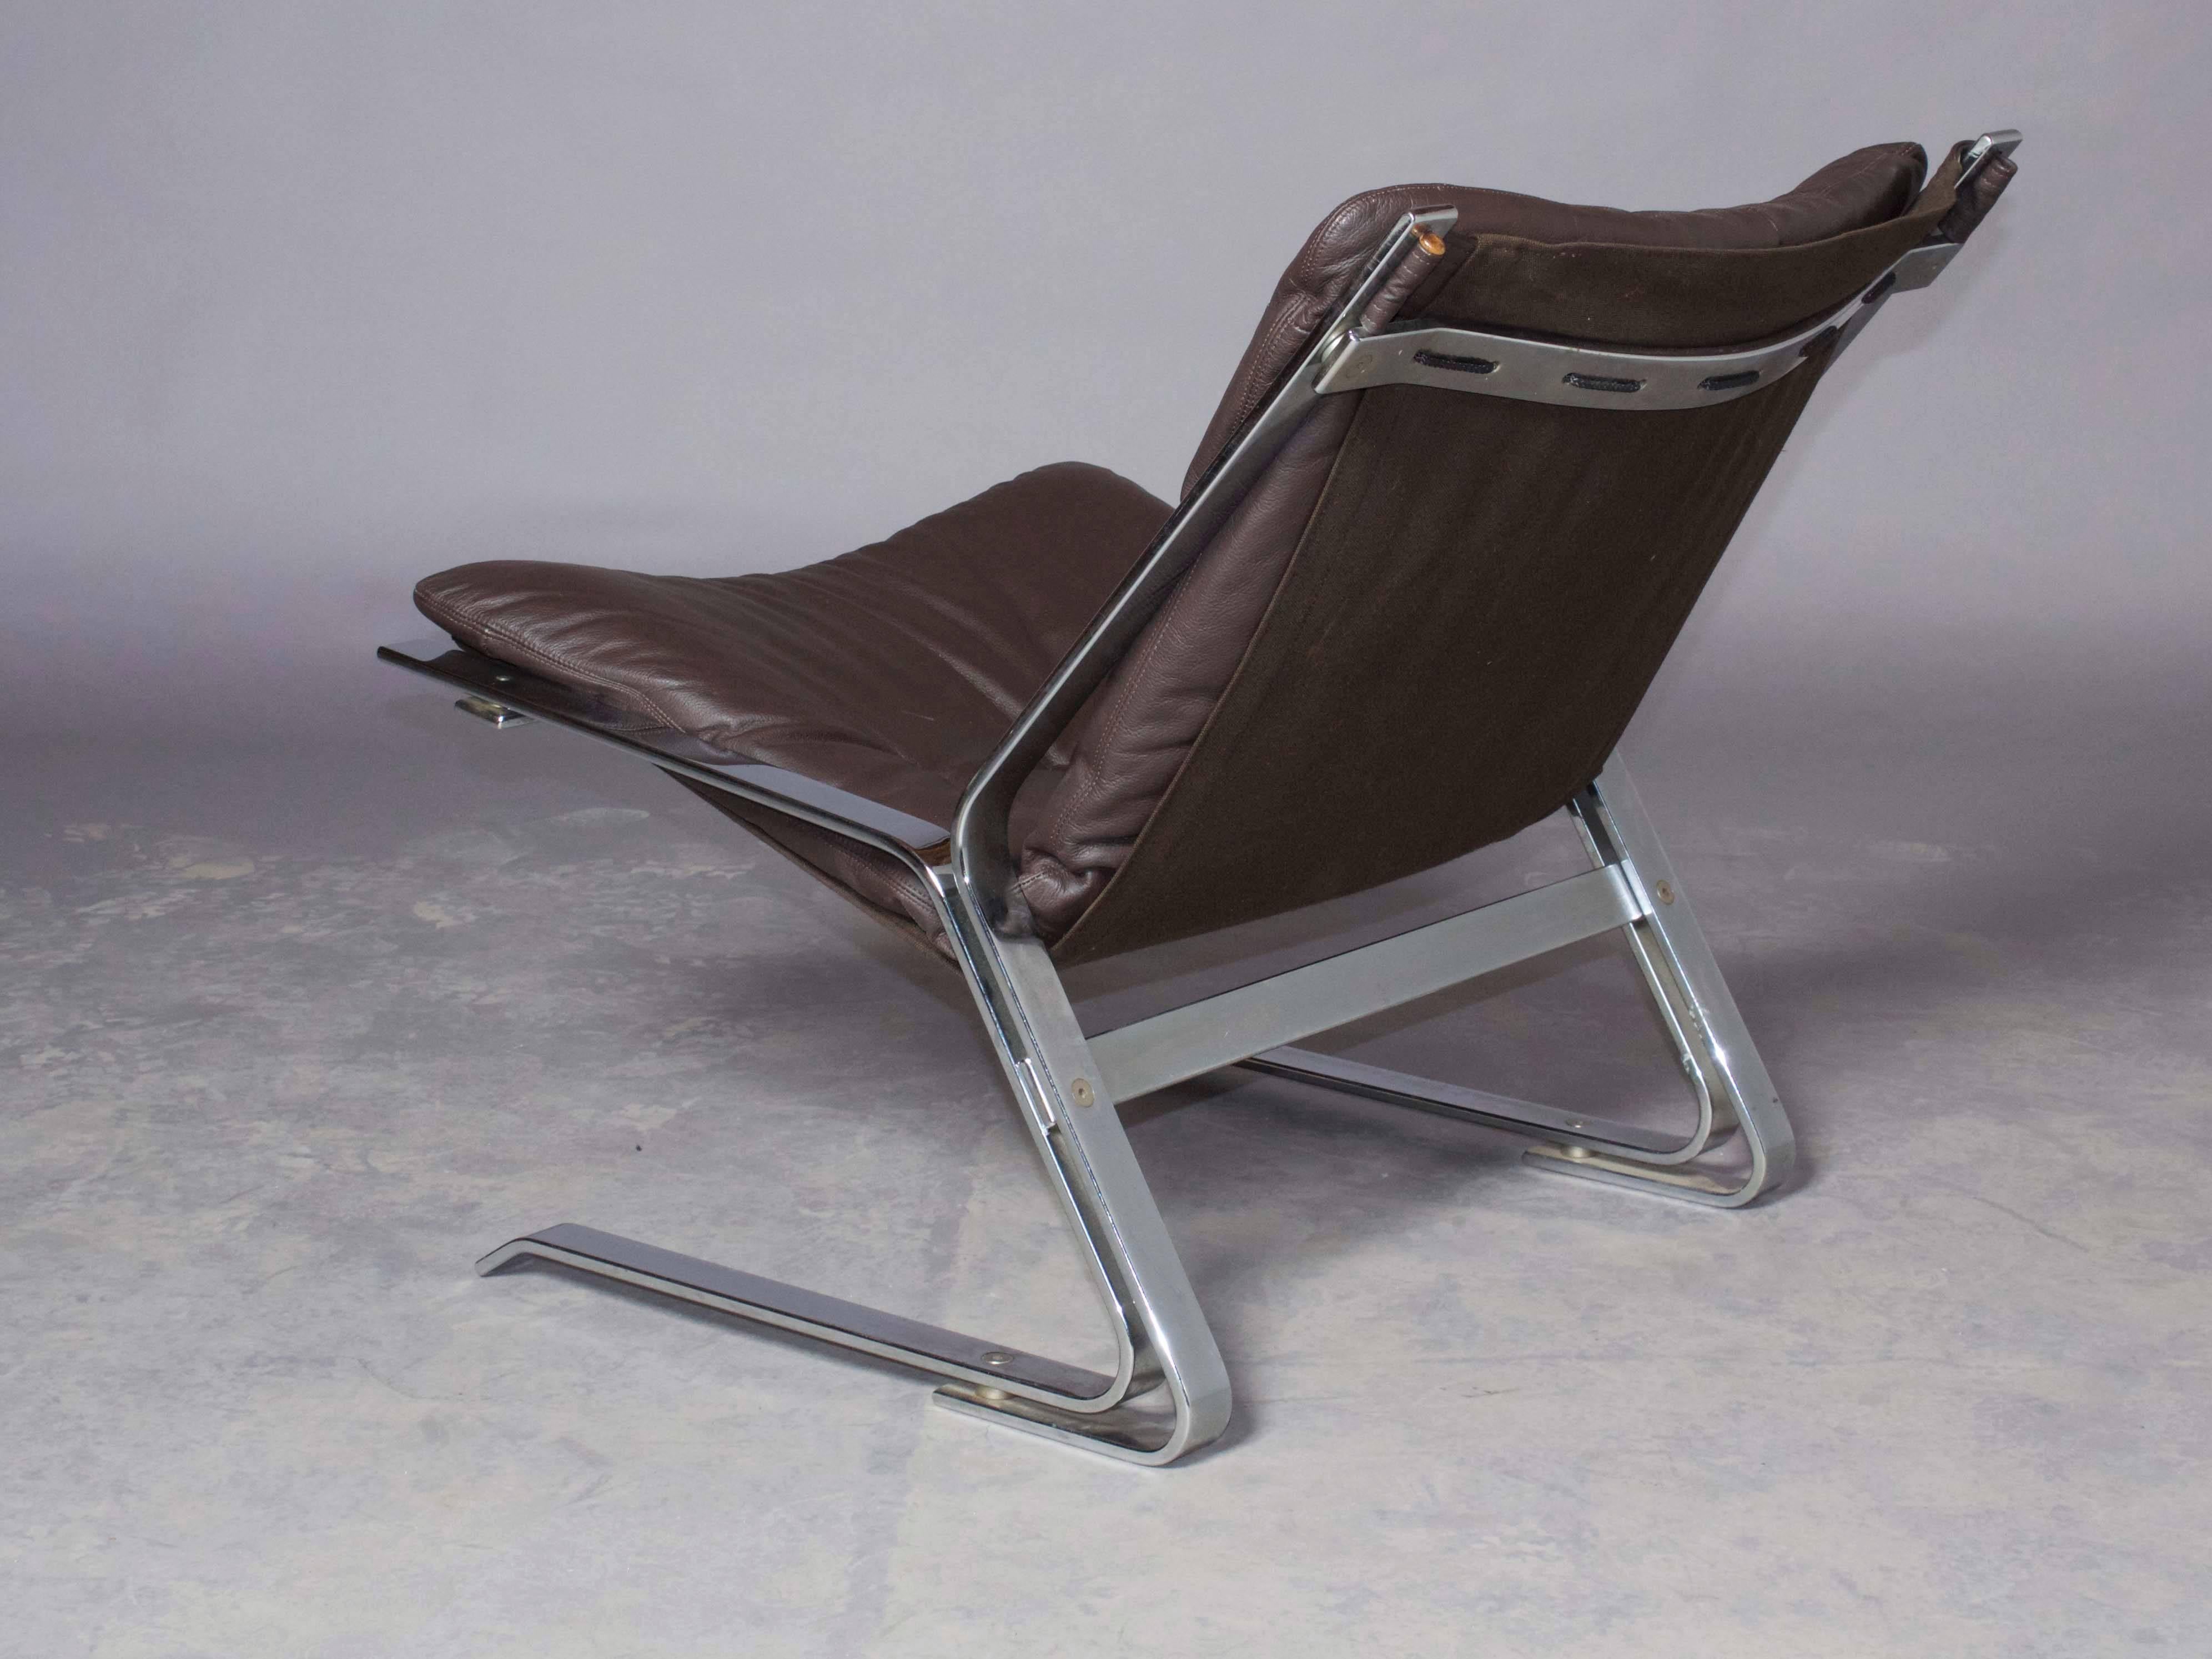 Vintage 1960s chrome and leather slipper chairs by Elsa and Nordahl Solheim

This pair of leather lounge chairs, the model Pirate, with chromed steel bases, stretched with canvas, loose seat cushions upholstered in buttoned leather. Designed in